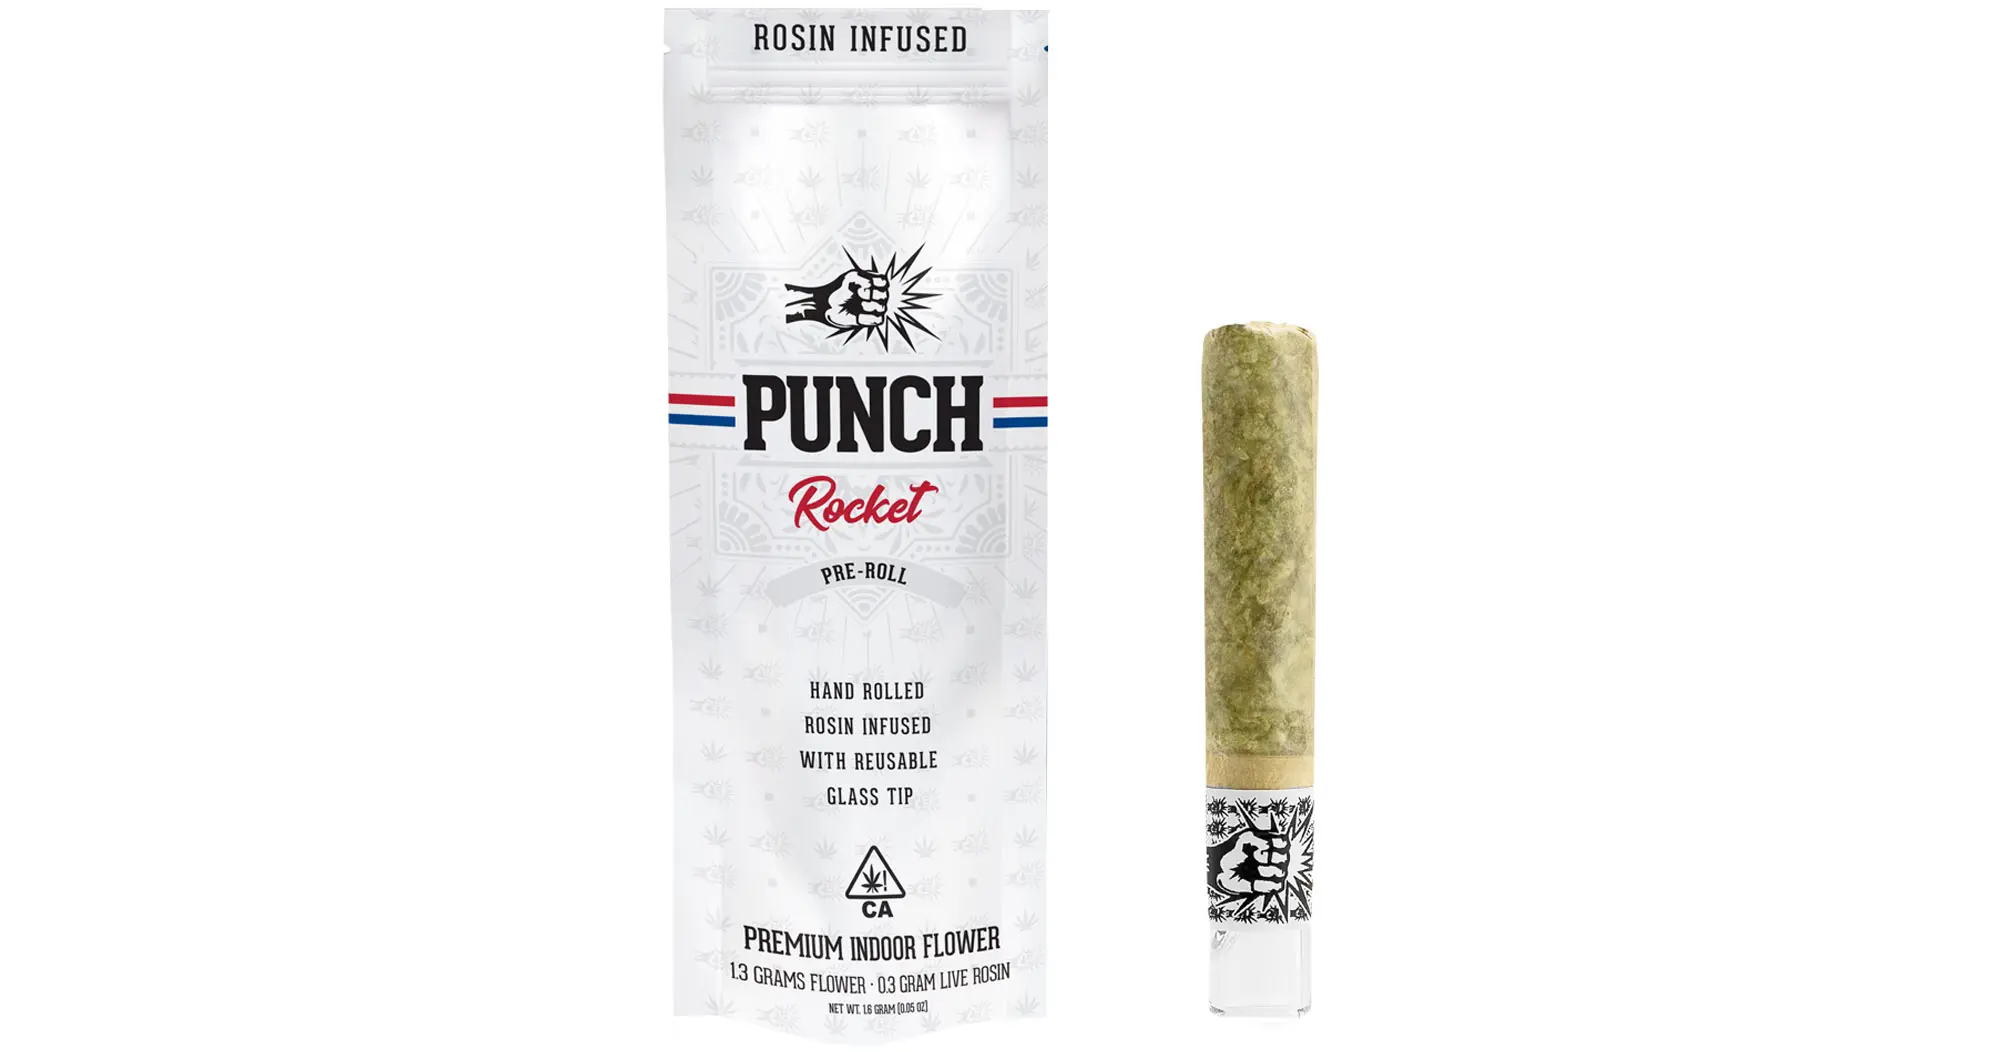 Lowryder x THC Bomb Rosin Infused Rocket Pre-Roll